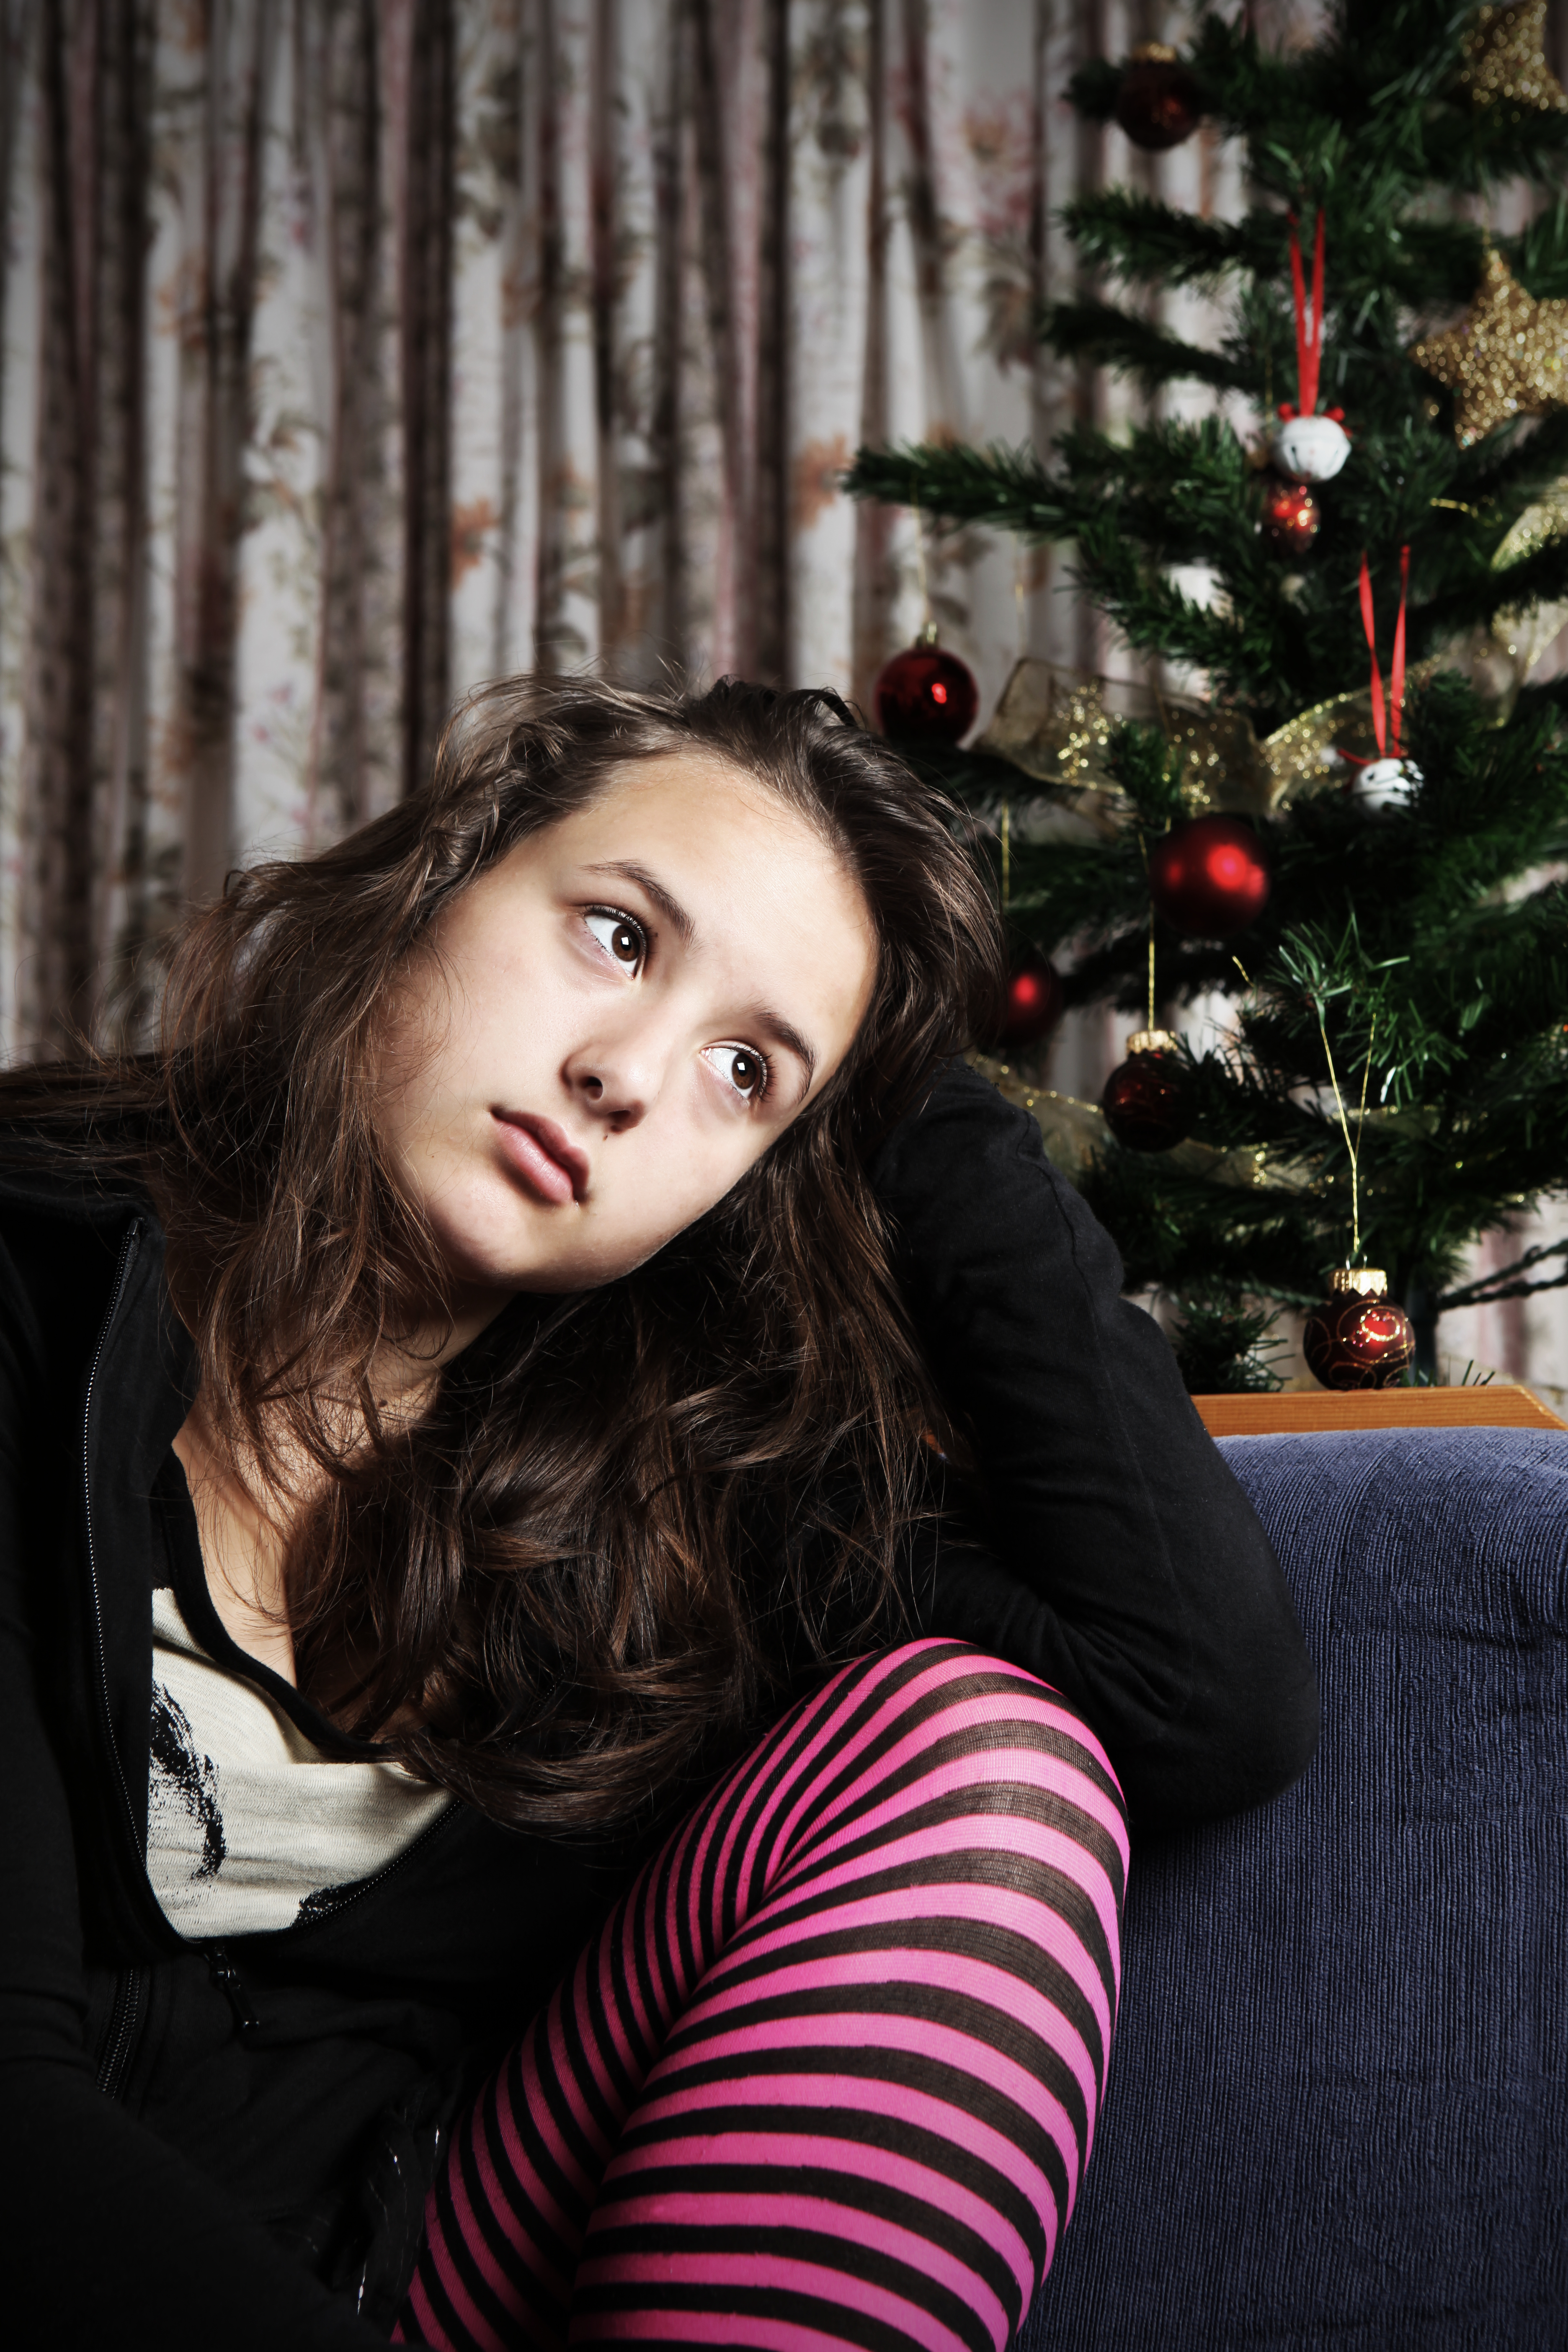 A sad woman sitting next to a Christmas tree | Source: Getty Images